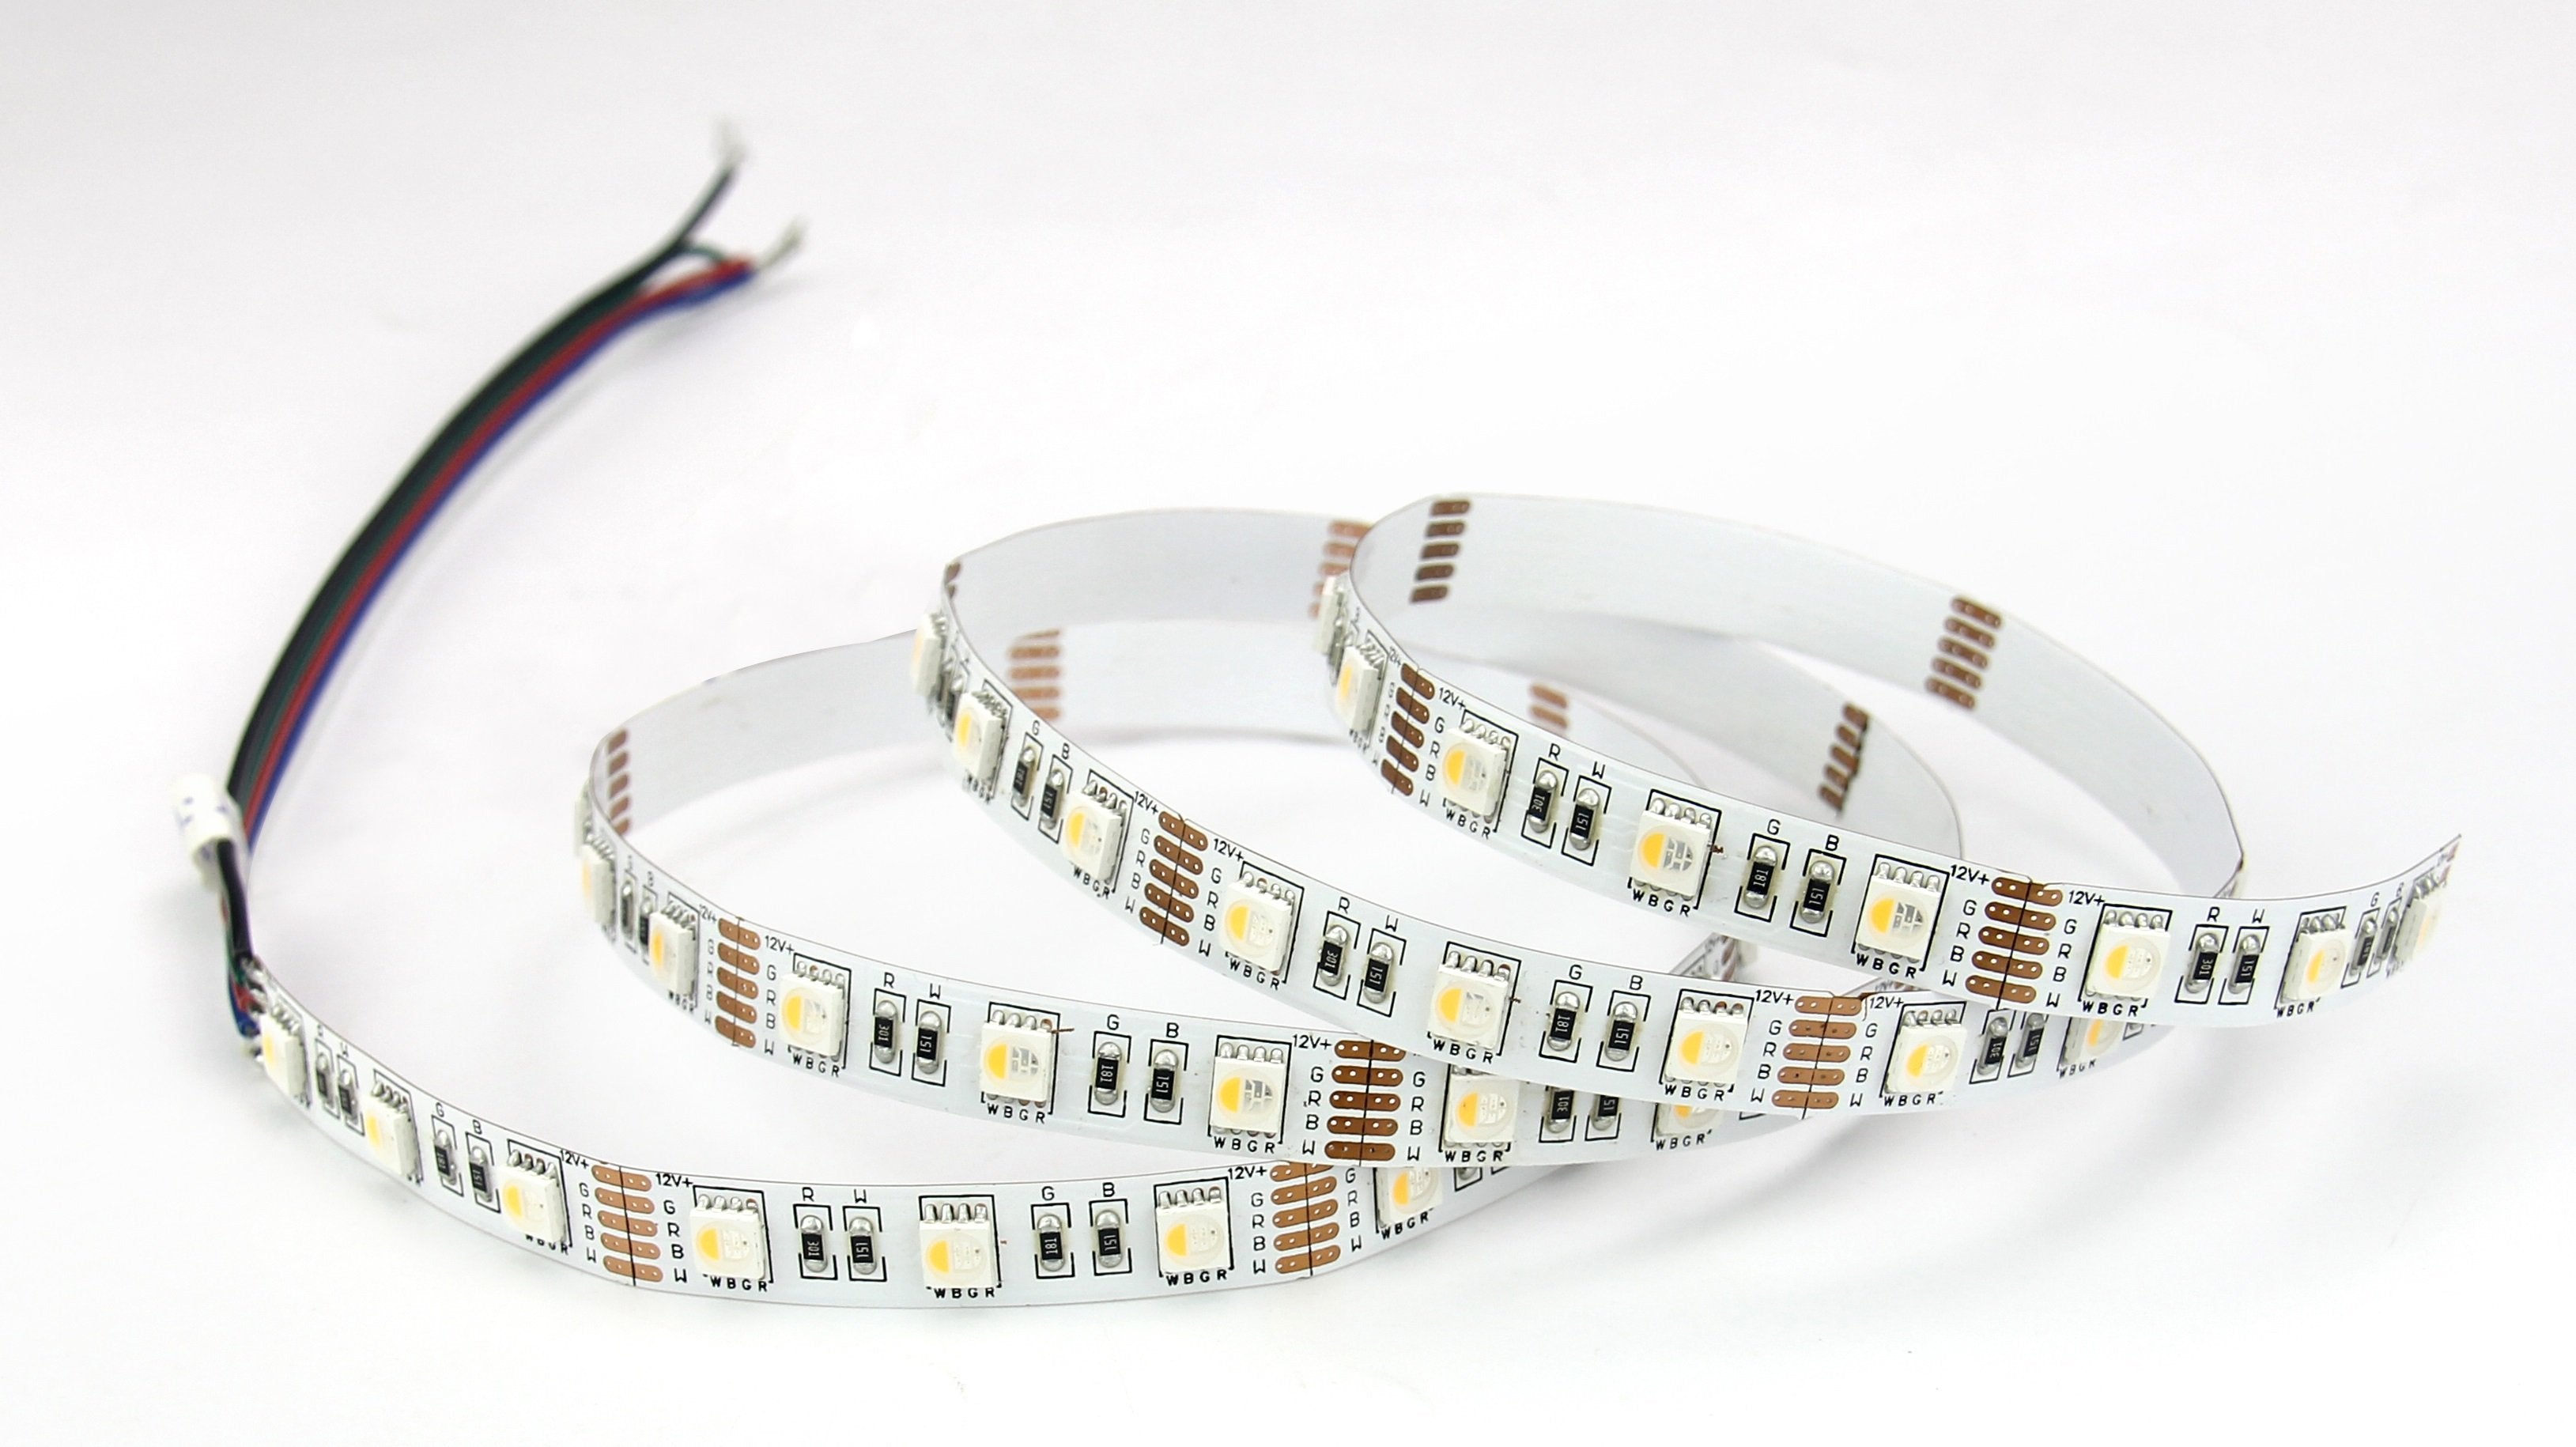 18W 4 in 1 chip RGBCW 60 LEDs tape